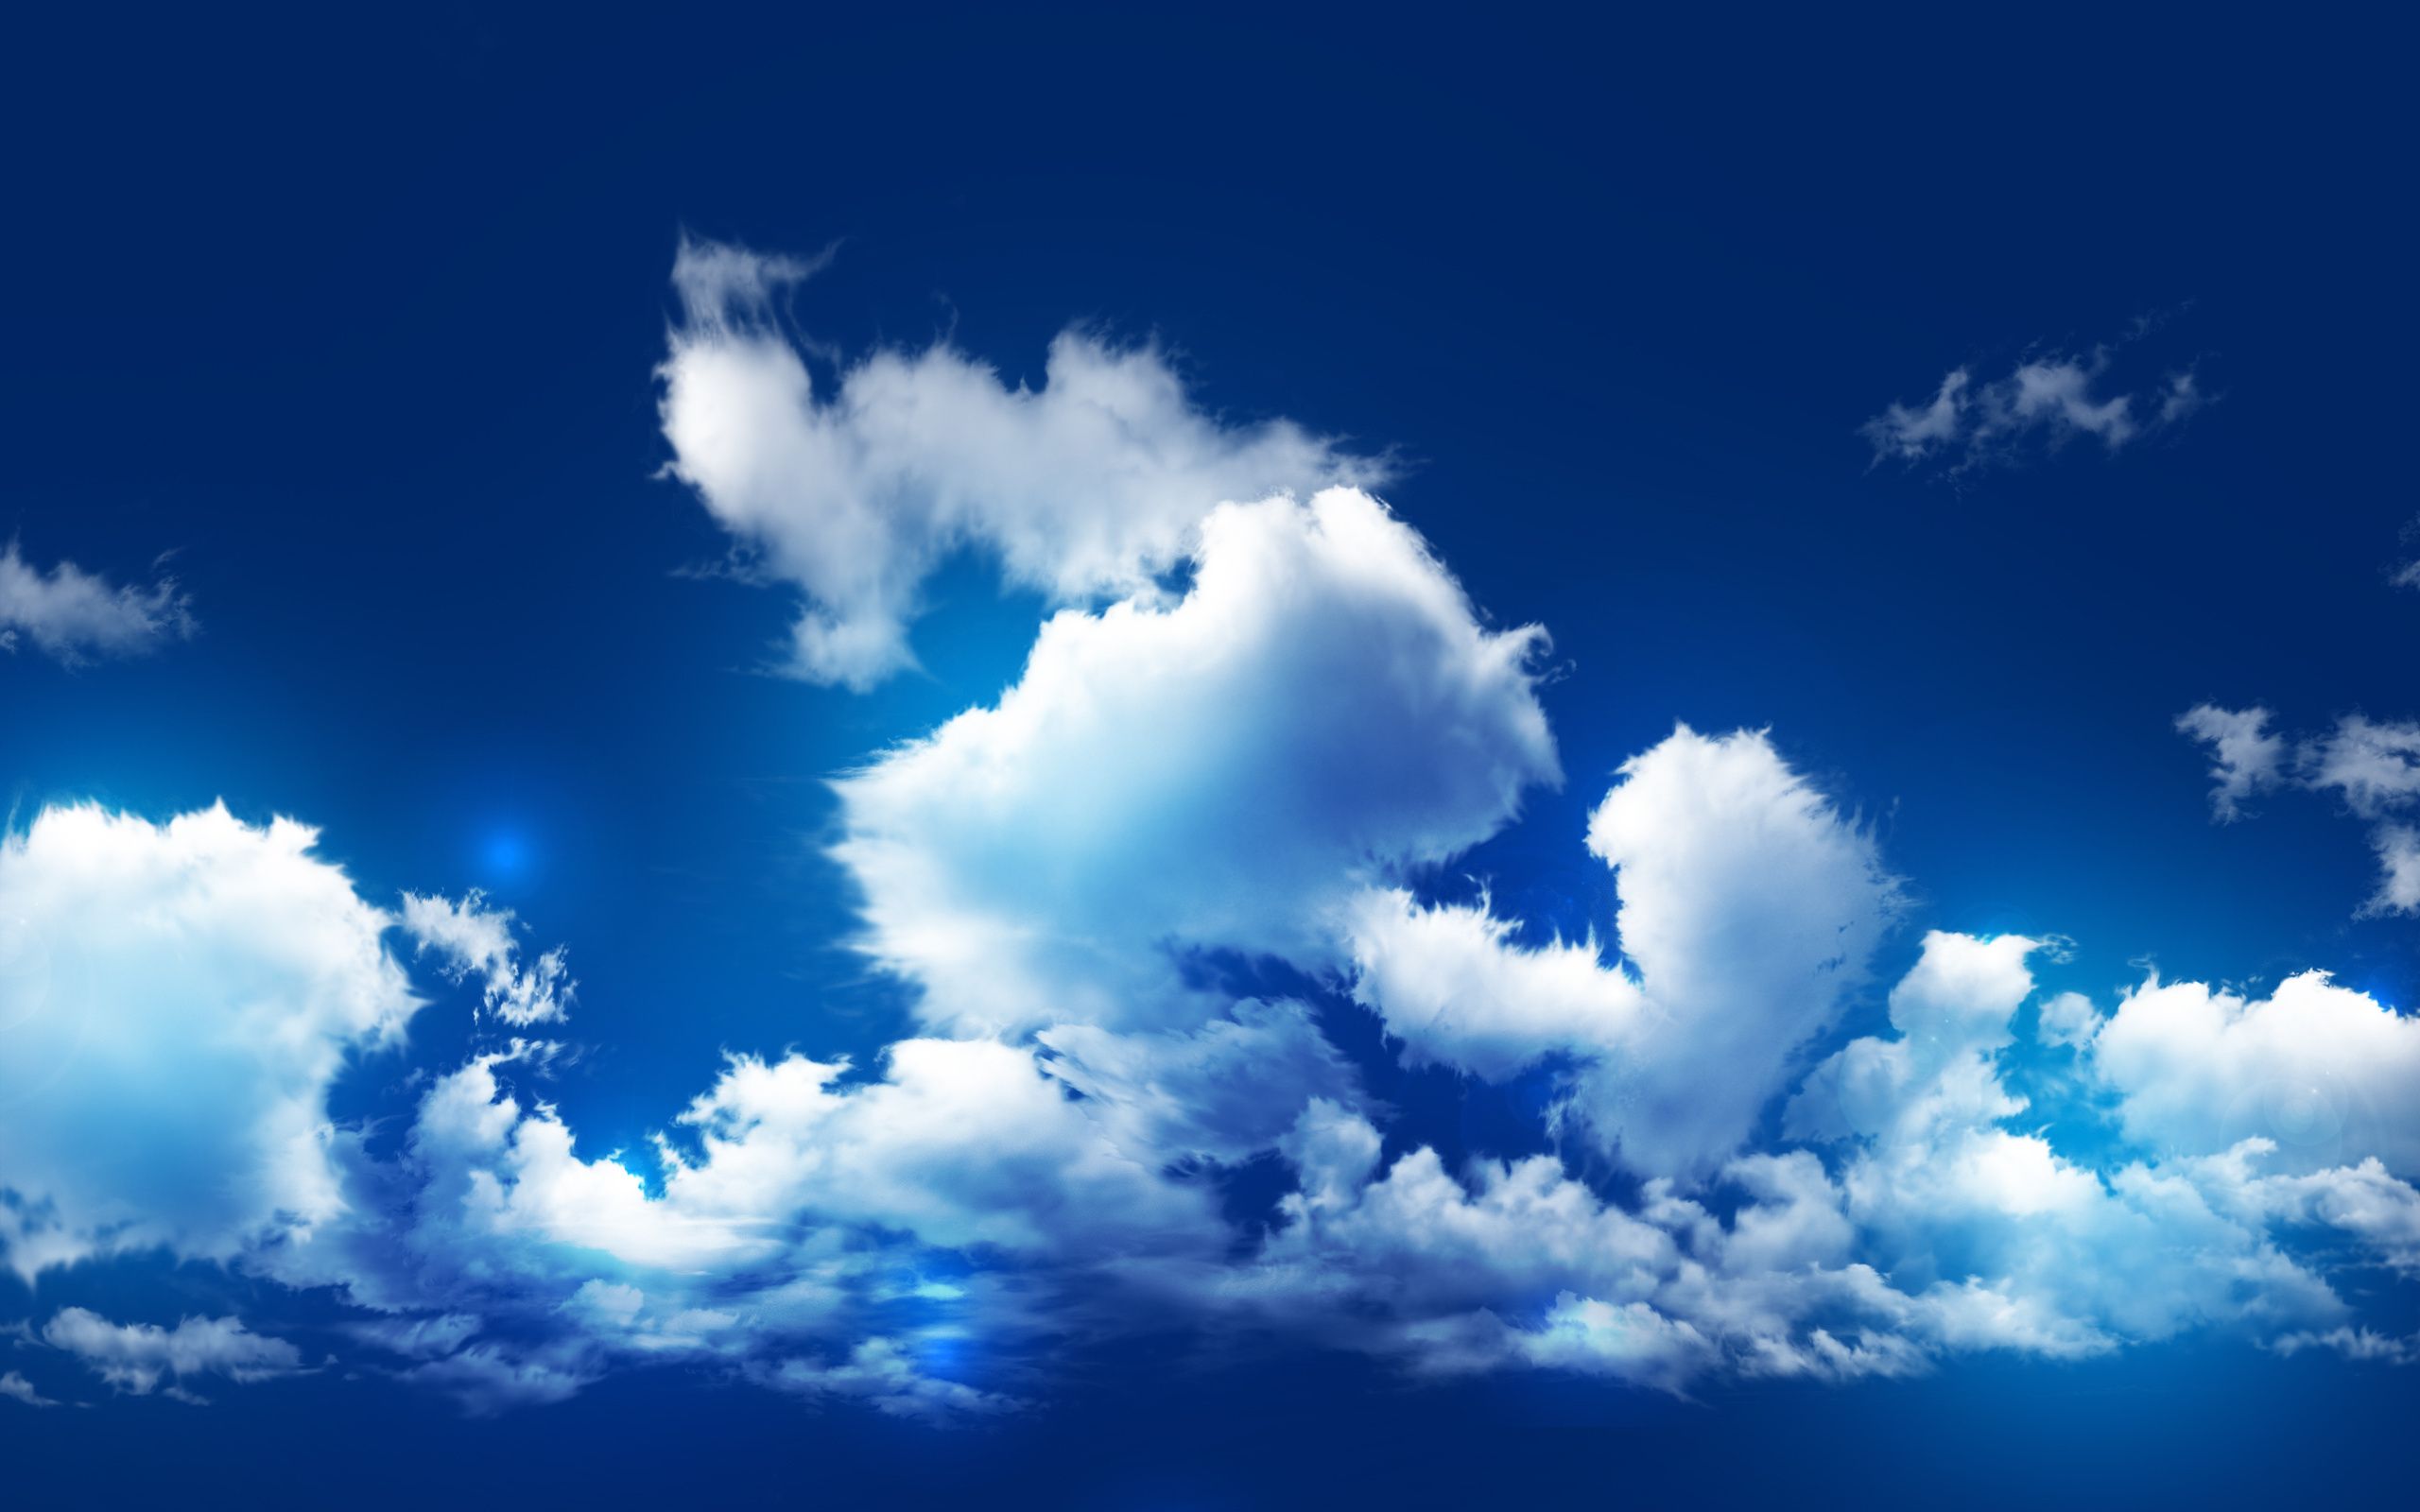 Blue Sky And Clouds Wallpaper | All Wallpapers | Pinterest | Cloud ...